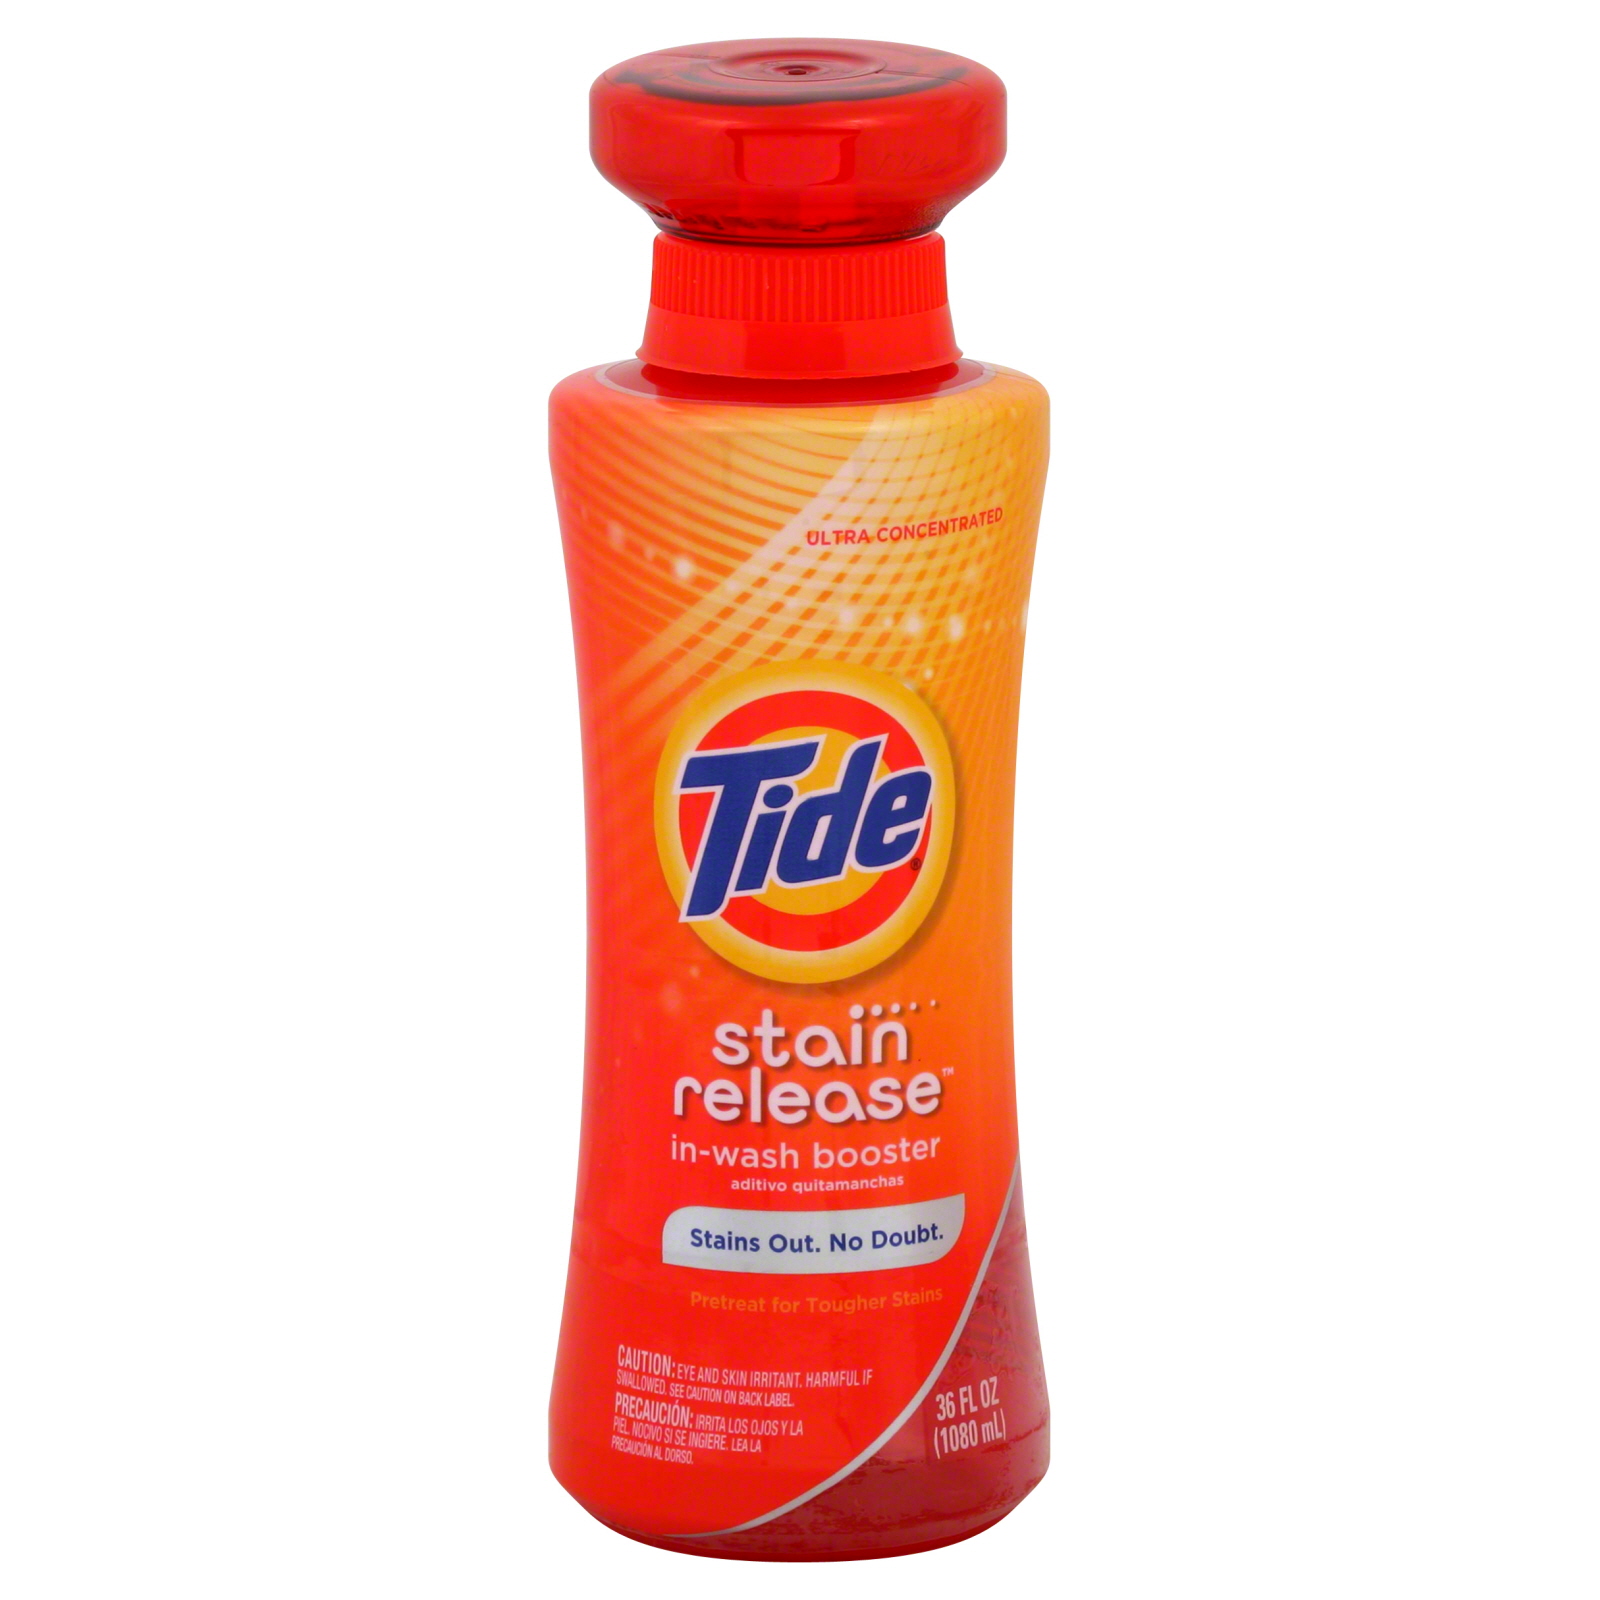 Tide Stain Release In-Wash Booster, Ultra Concentrated, 36 fl oz (1080 ml)